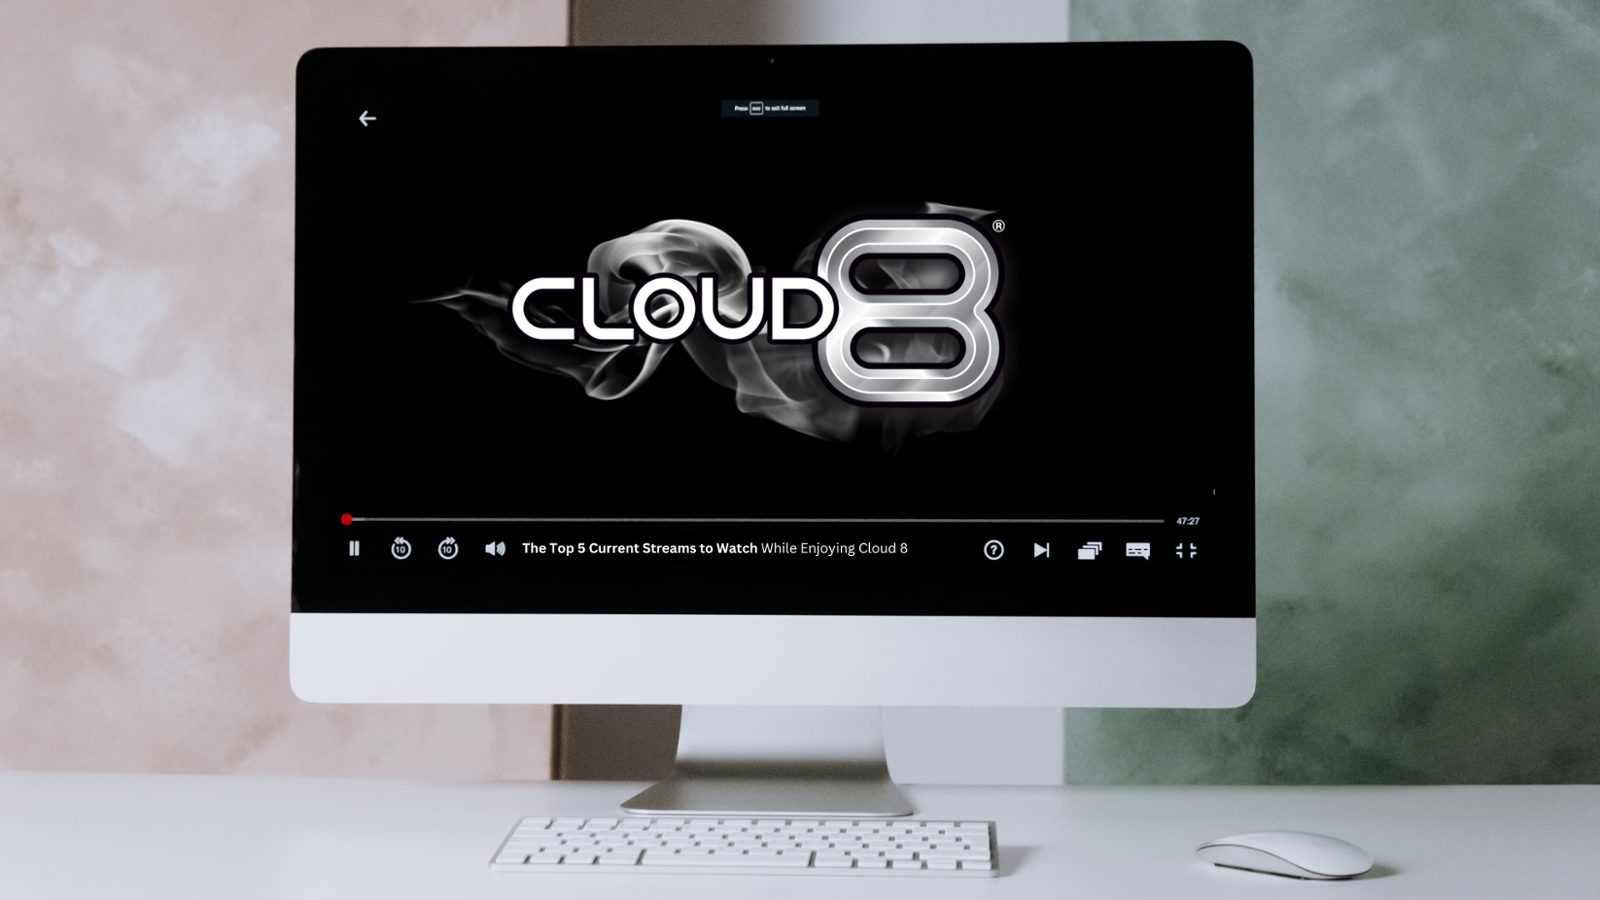 The Top 5 Current Streams to Watch While Enjoying Cloud 8